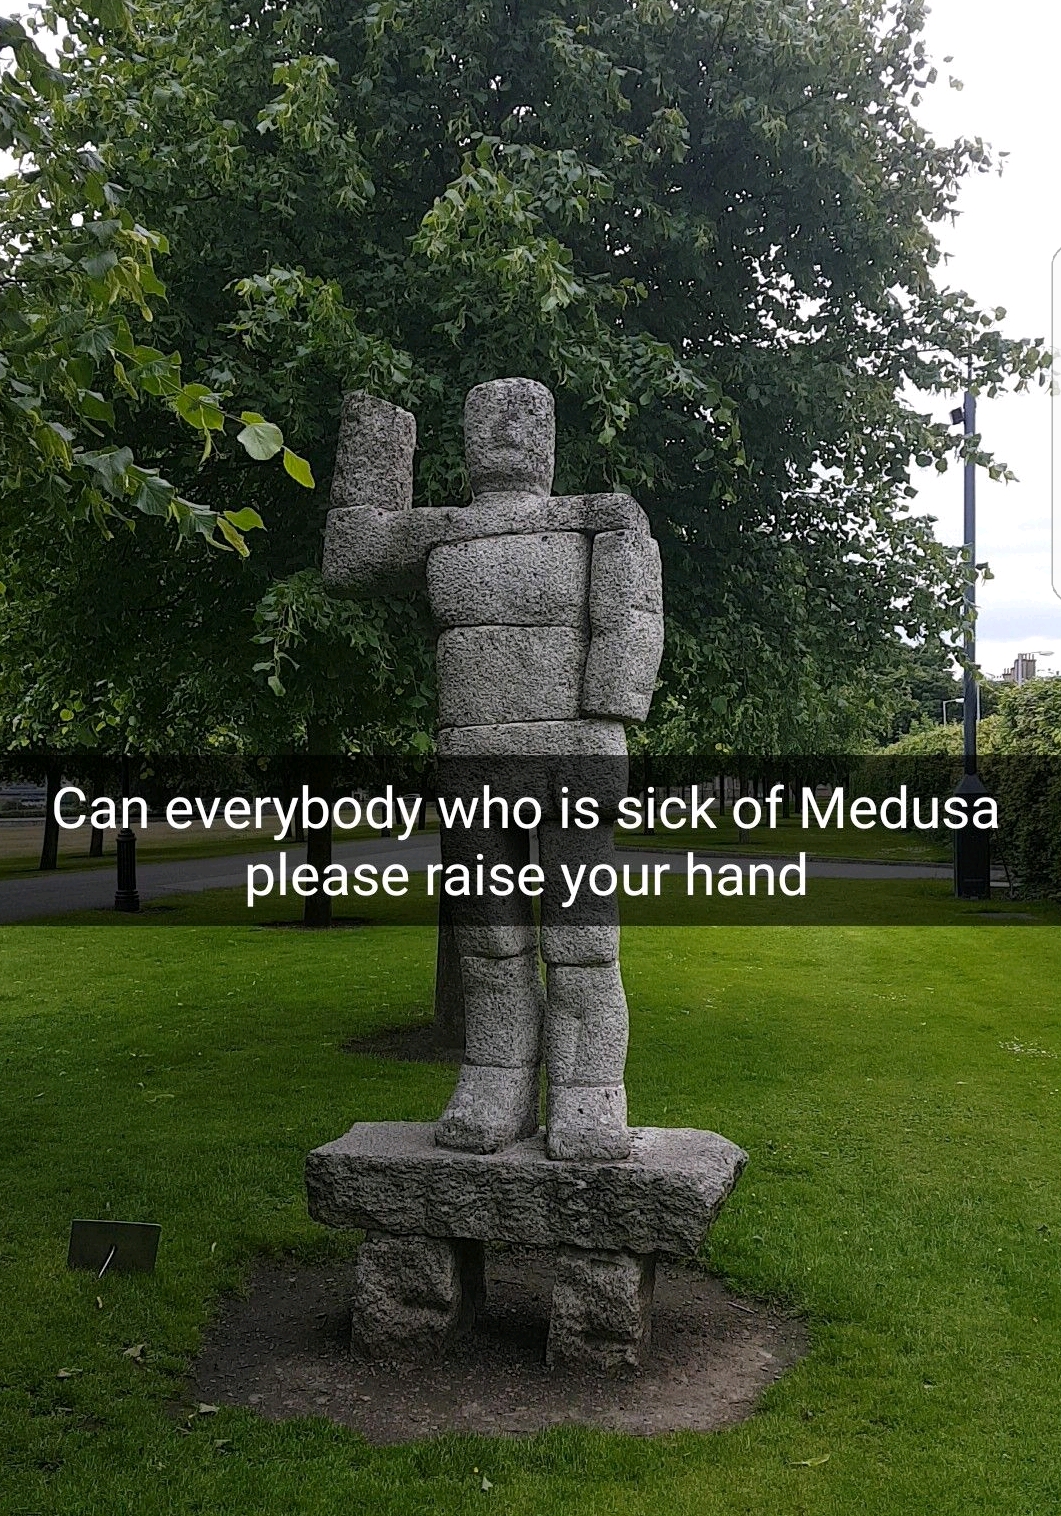 Snapchat of statue with raised hand voting against Medusa